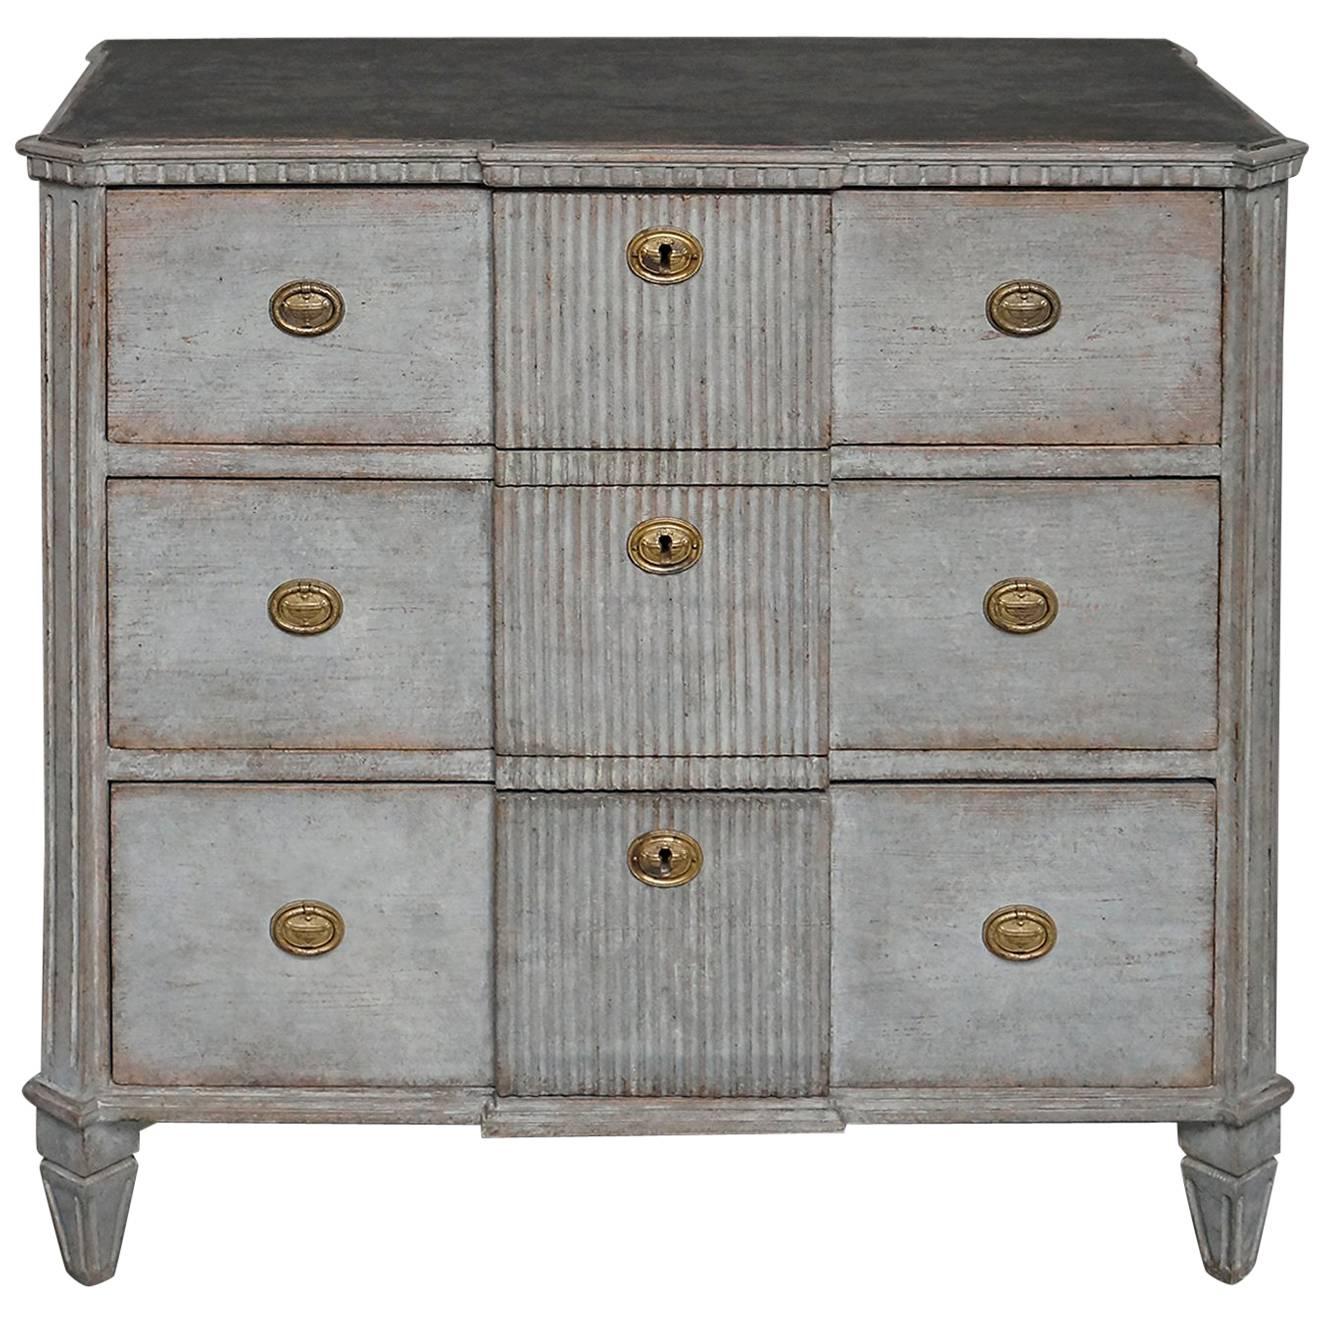 Gustavian Style Commode in Worn Gray Paint